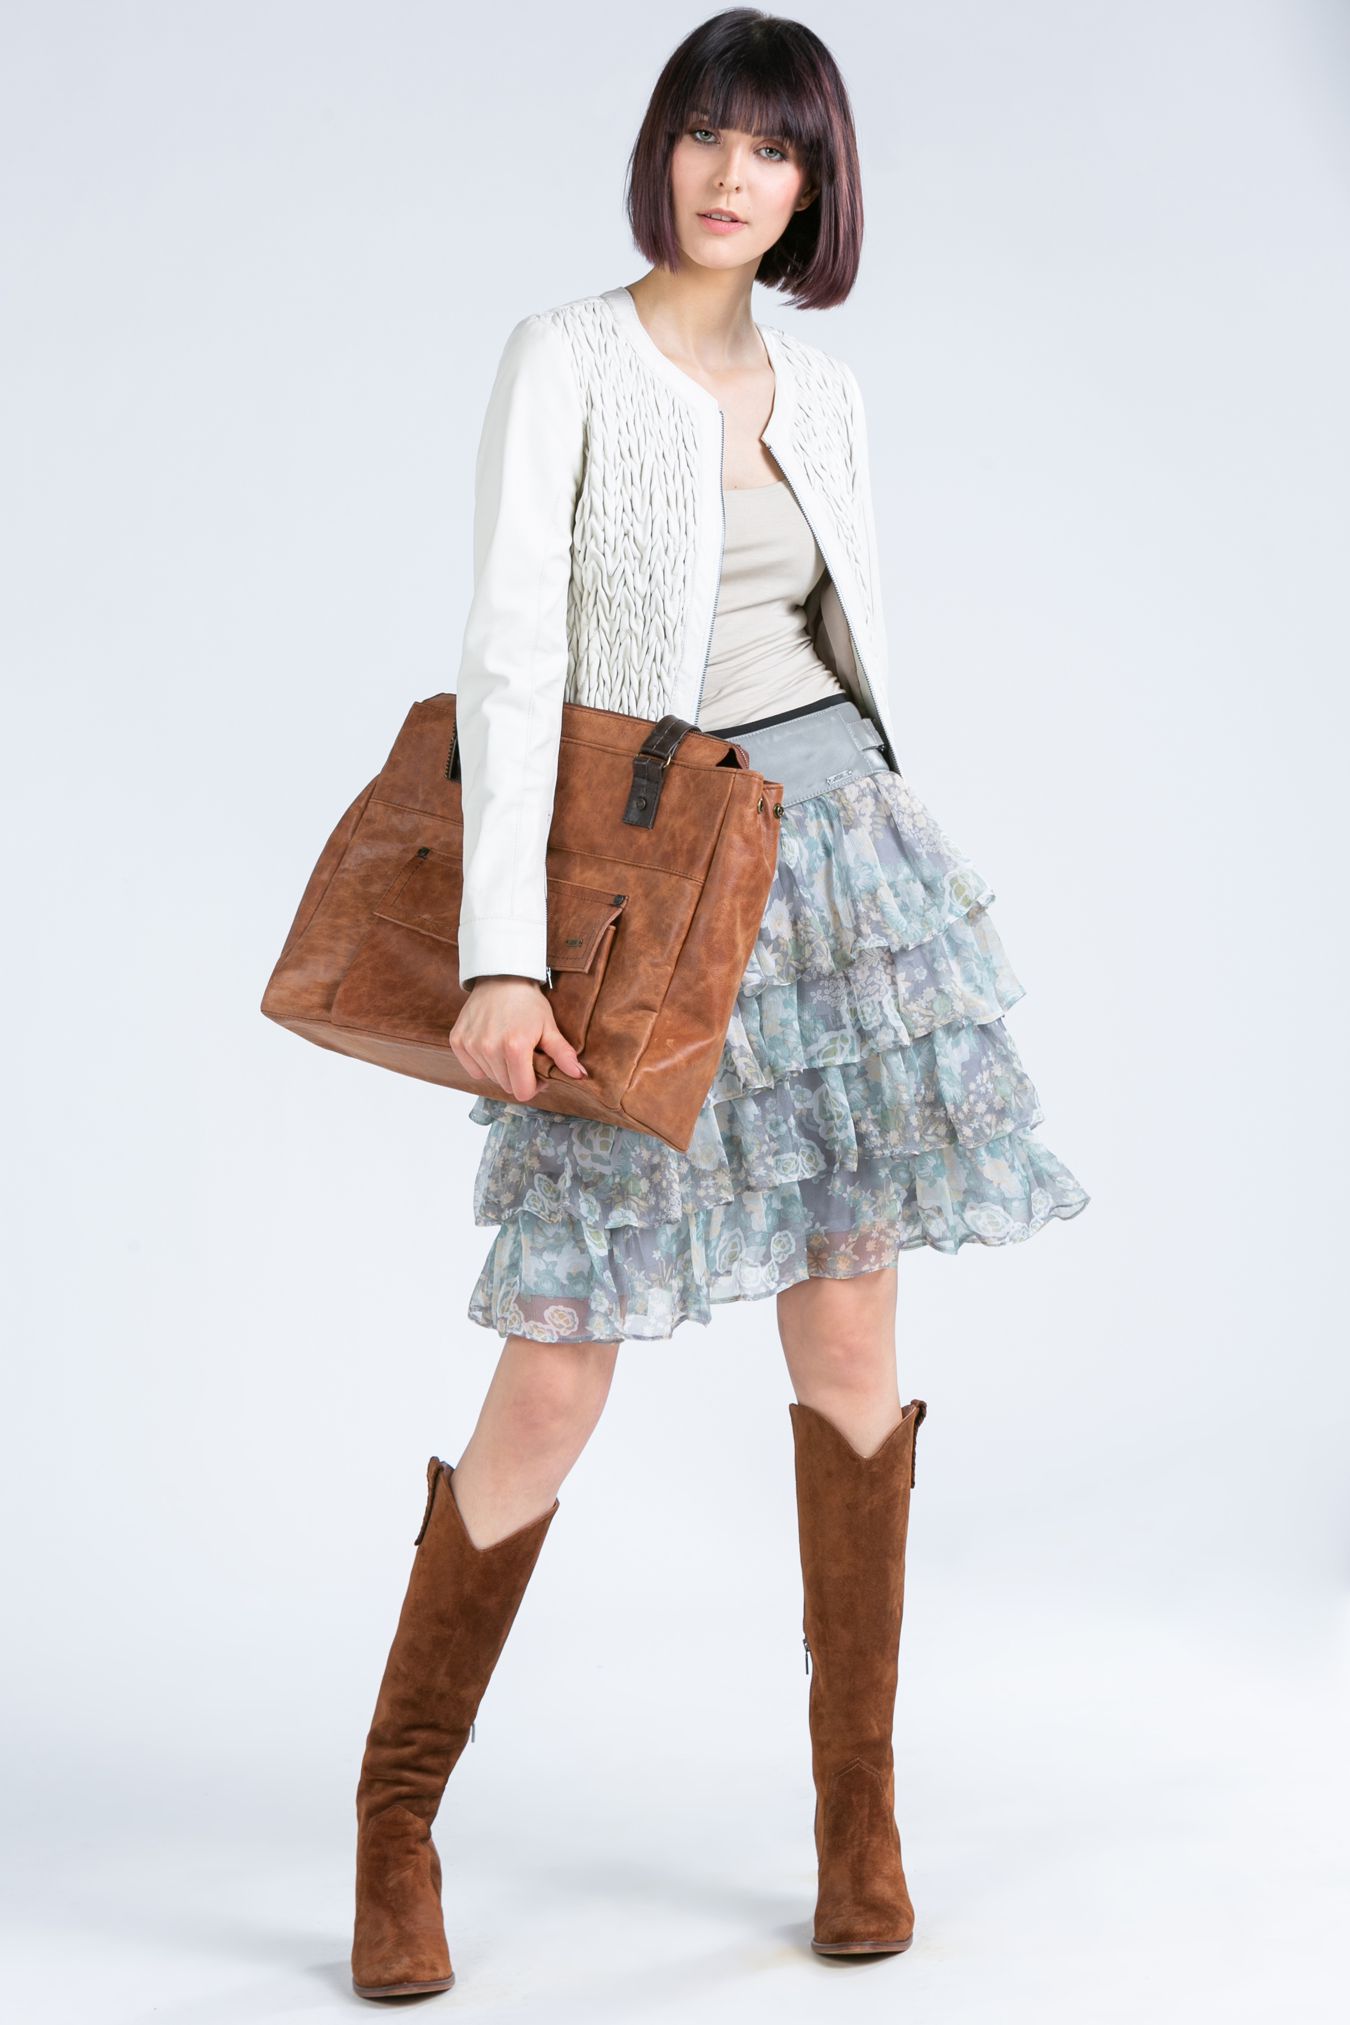 skirt made of silk and leather, silk skirt with a leather yoke and ruffles, skirt with a plant pattern, ash-colored skirt, skirt with a yoke made of natural leather and silk chiffon